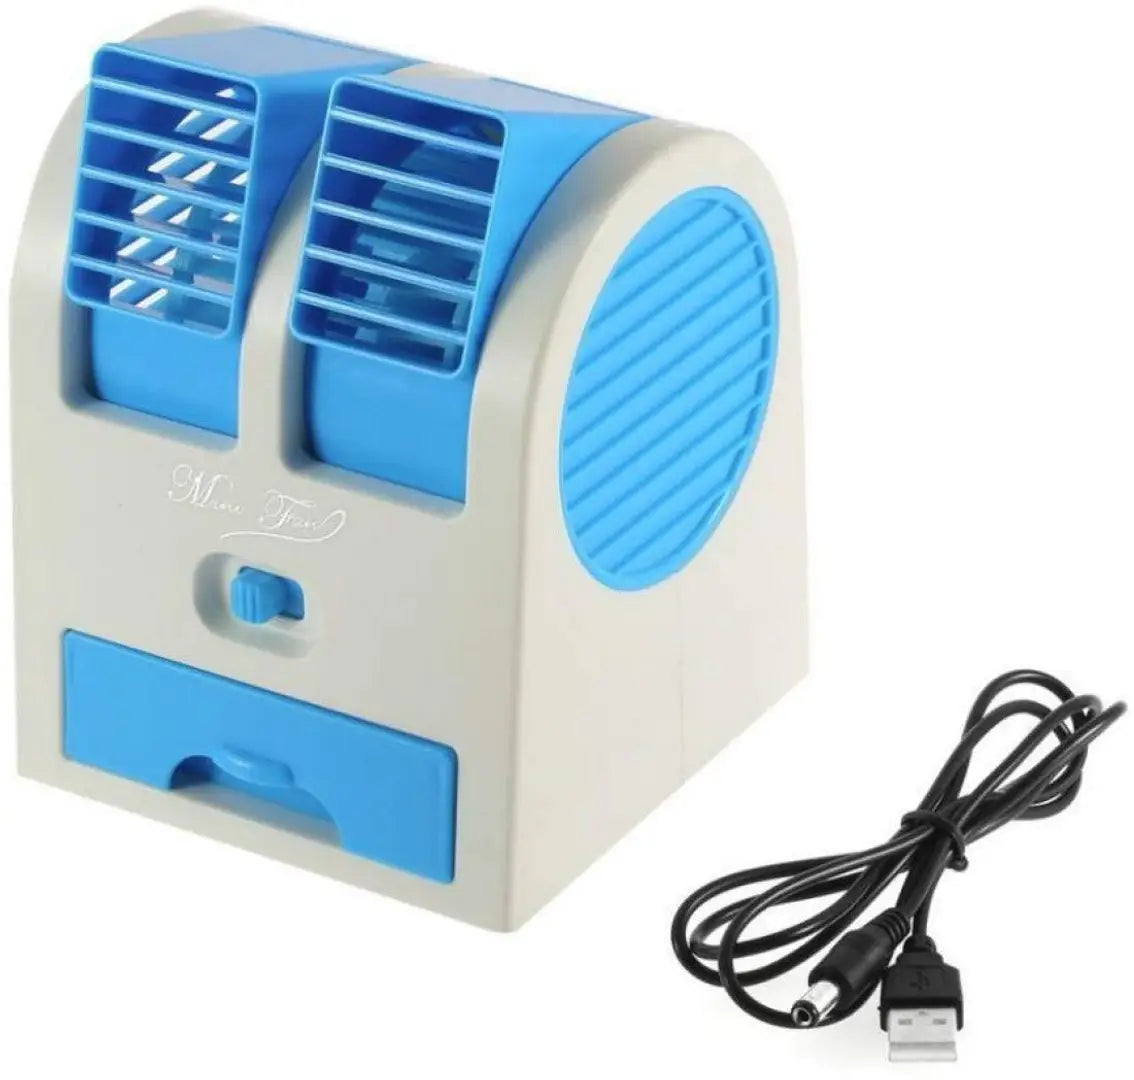 Air Cooling Fan Blade USB Portable Mini AC Cooler Battery Operated Mini Water Less Duel Blower with Ice Tray Best for Home, Shop, Table, Kitchen  Outdoor